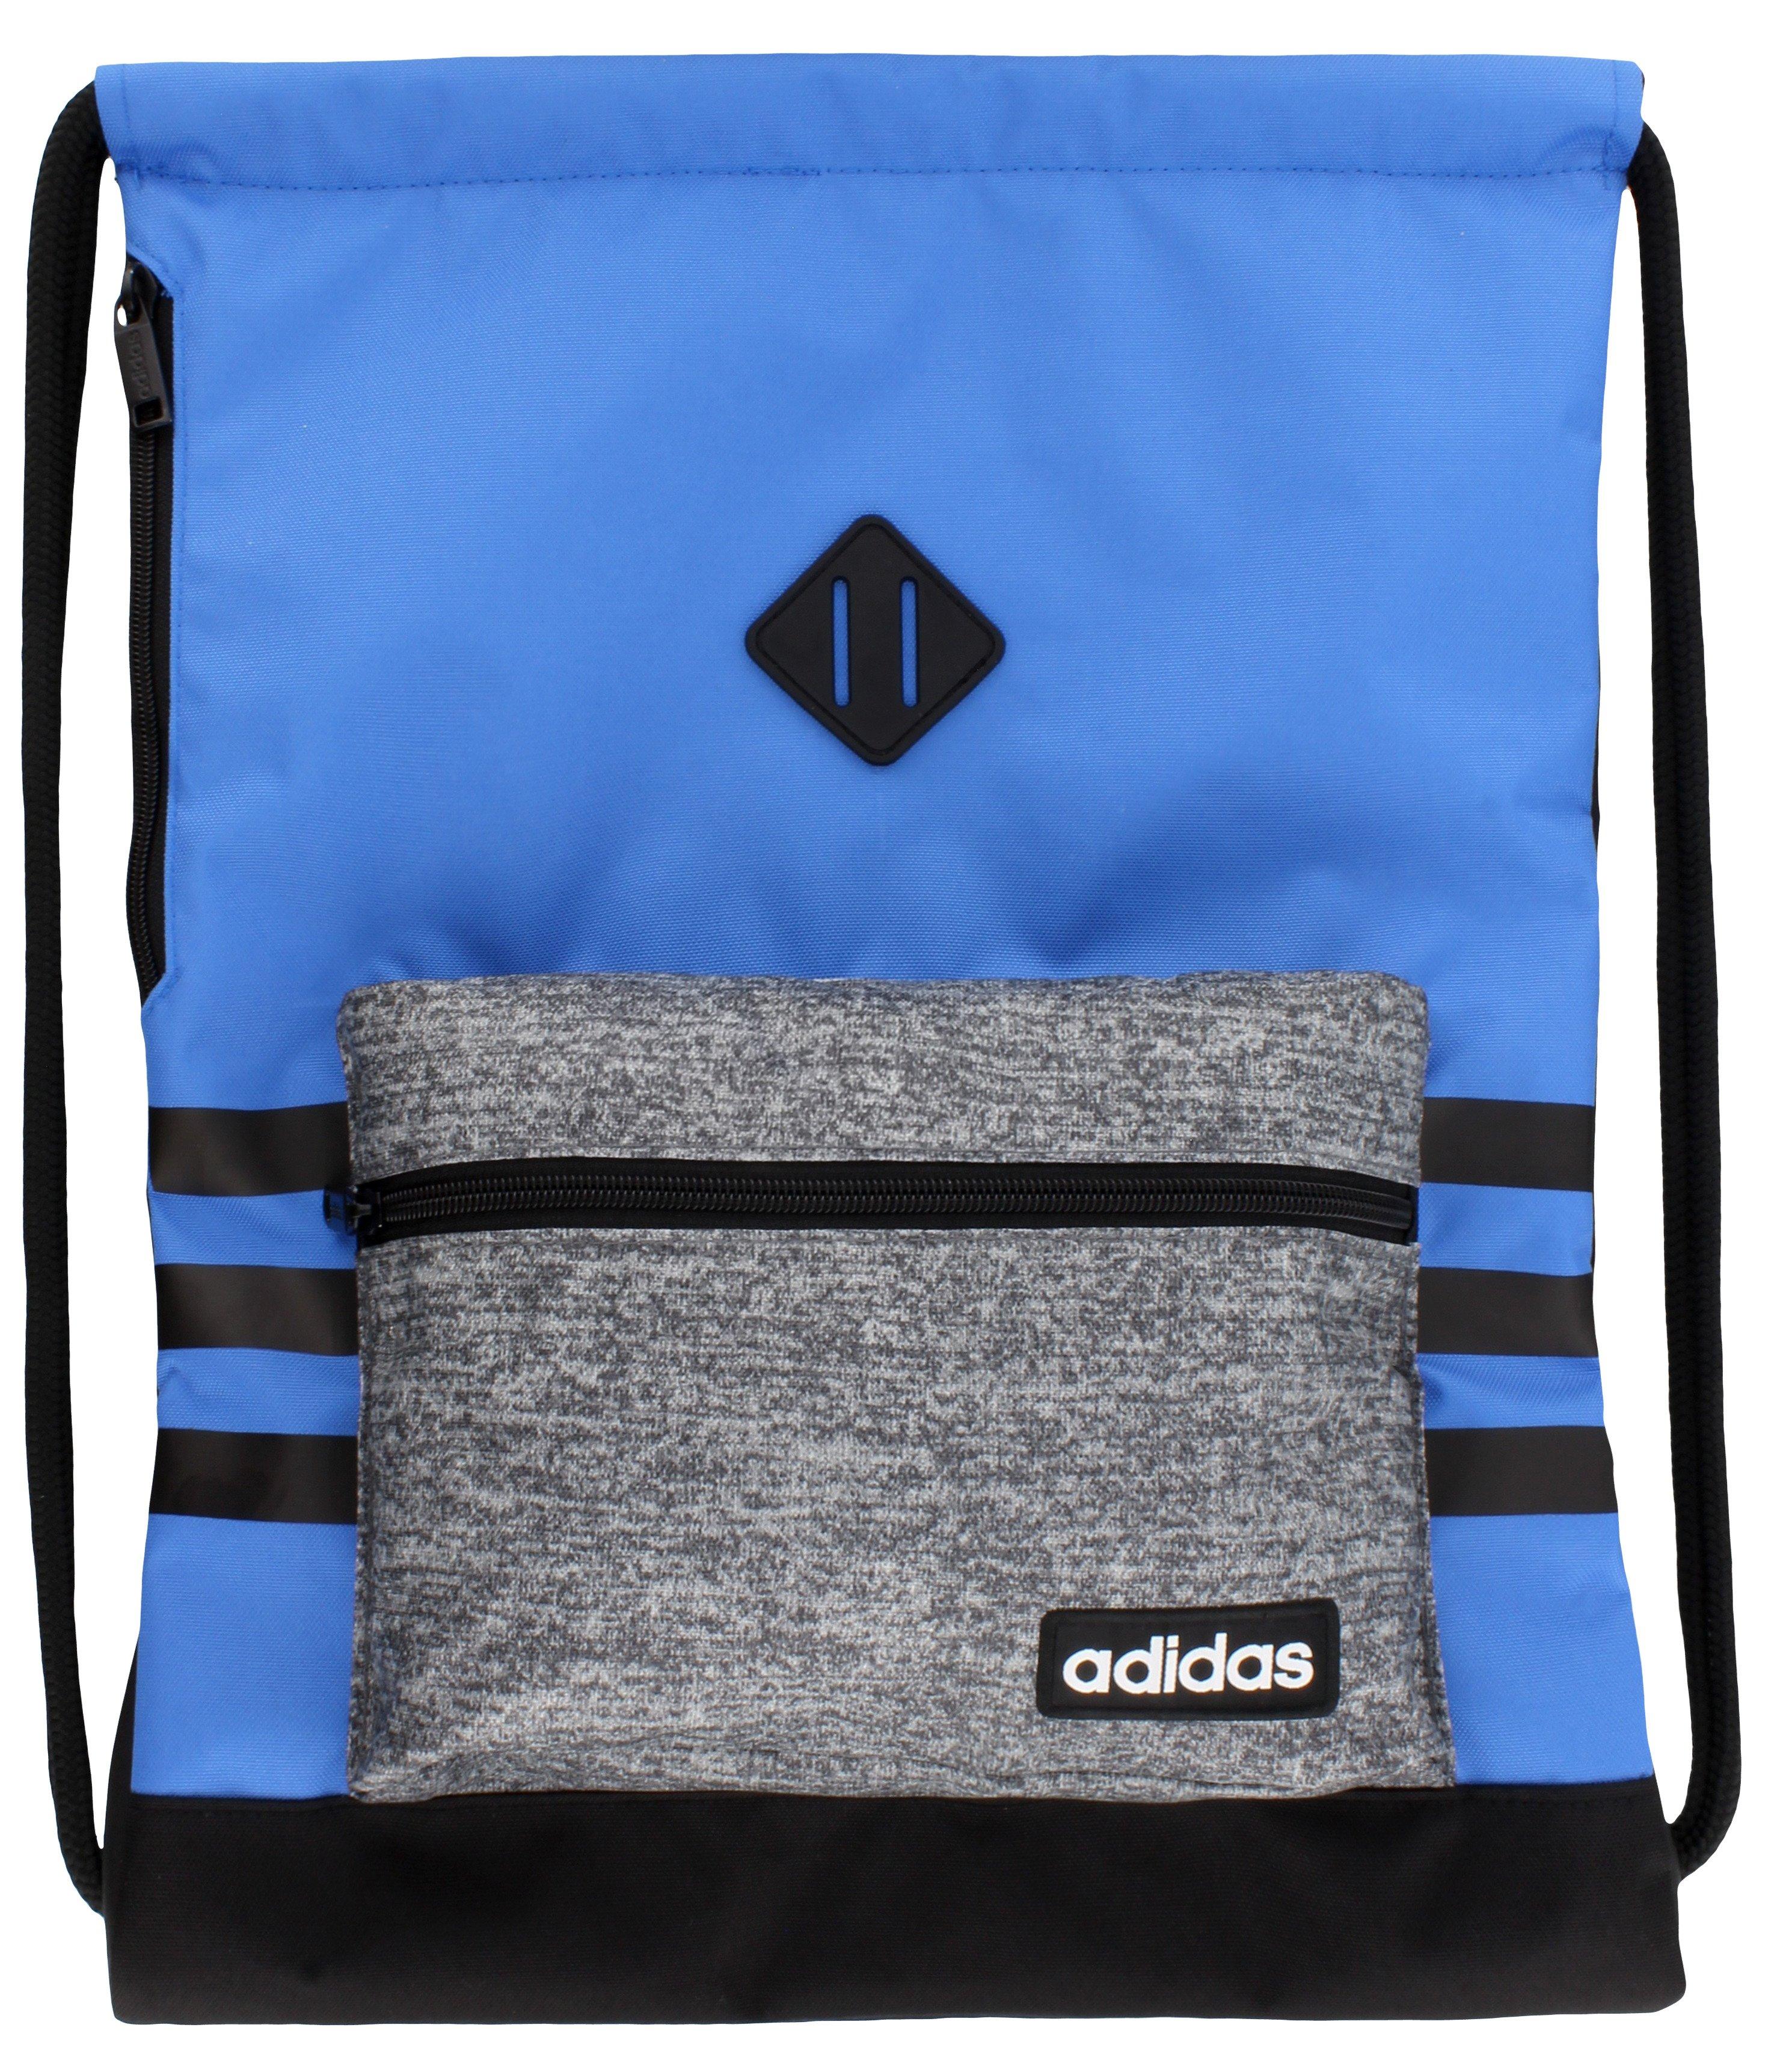 adidas classic 3s sackpack